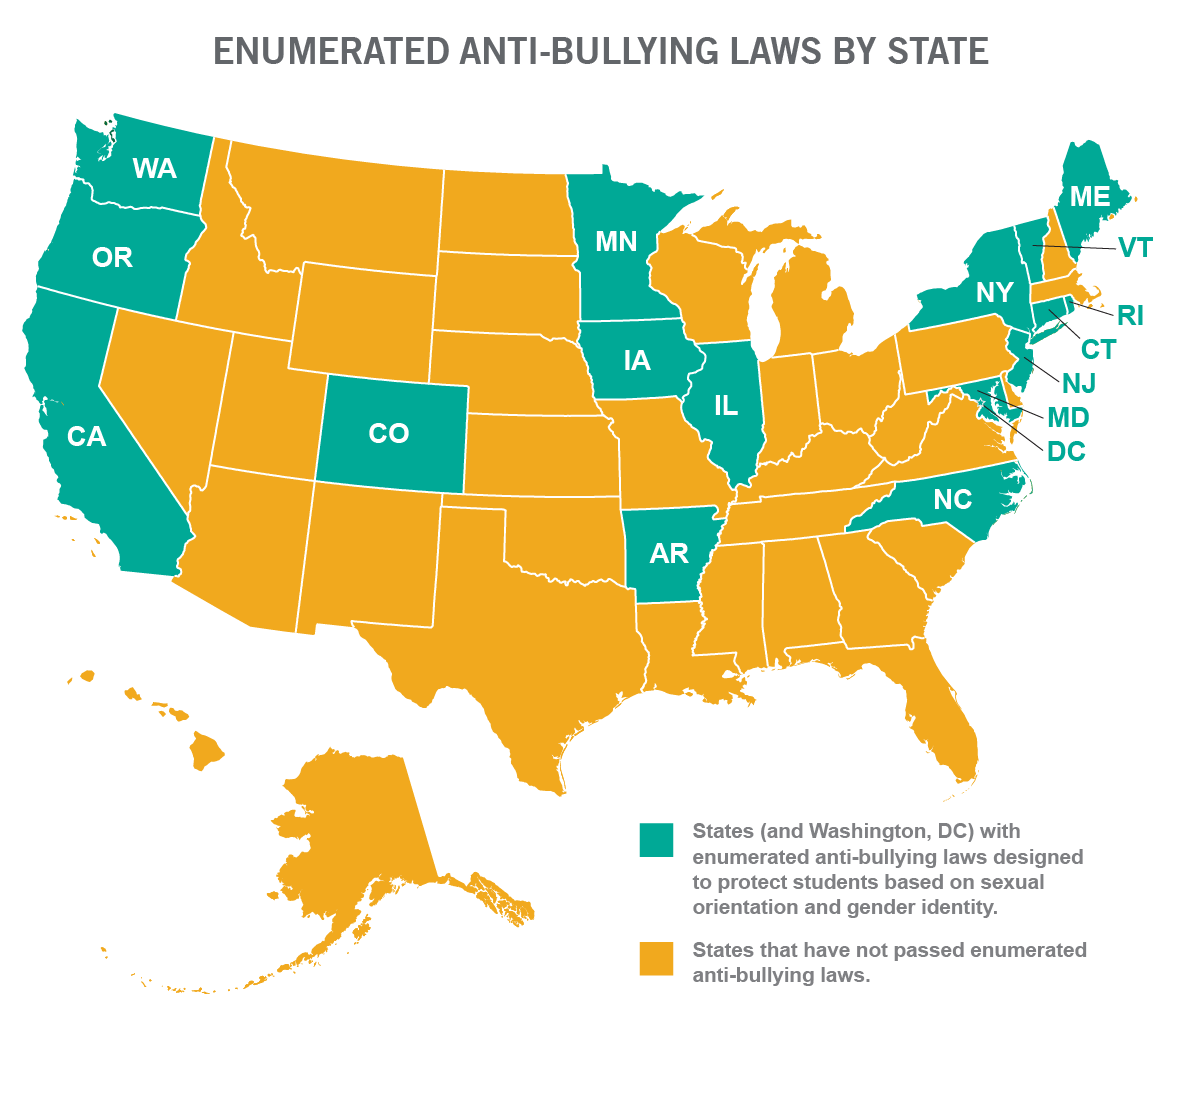 GLSEN: Enumerated anti-bullying laws by state